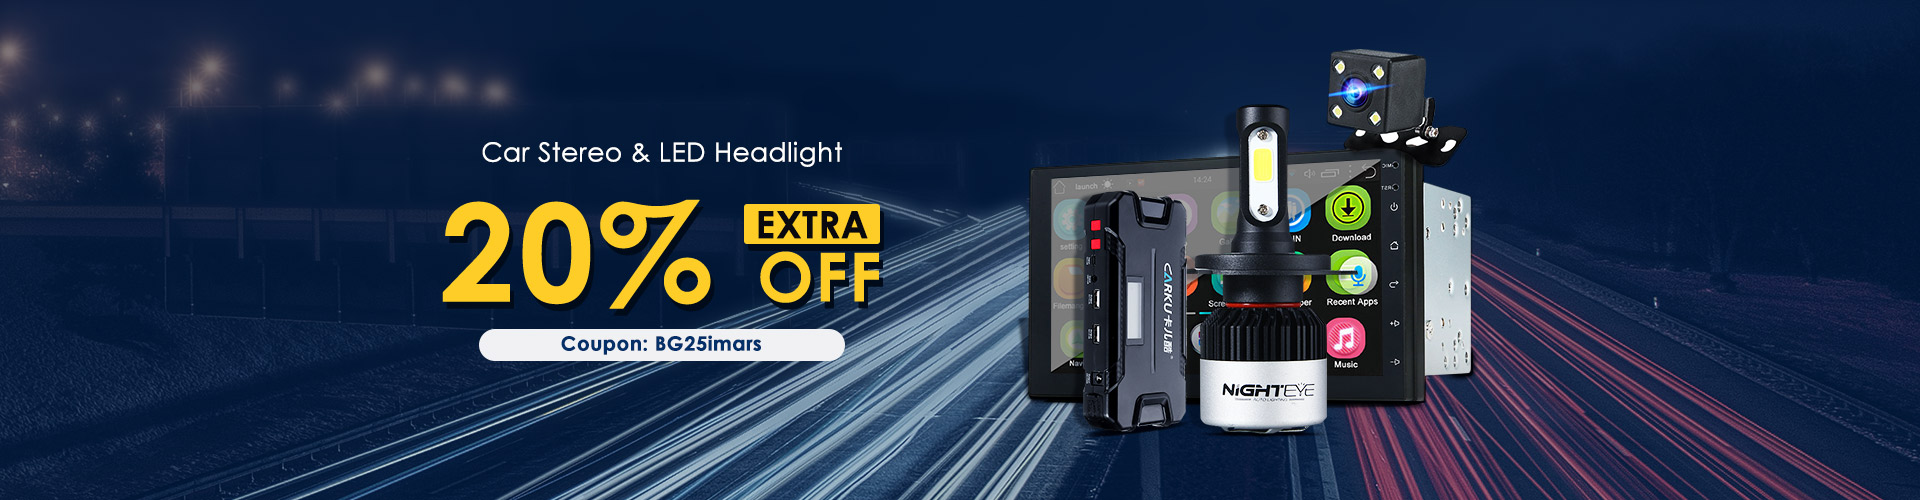 Extra 20% OFF for Car Stereo and LED Headlight